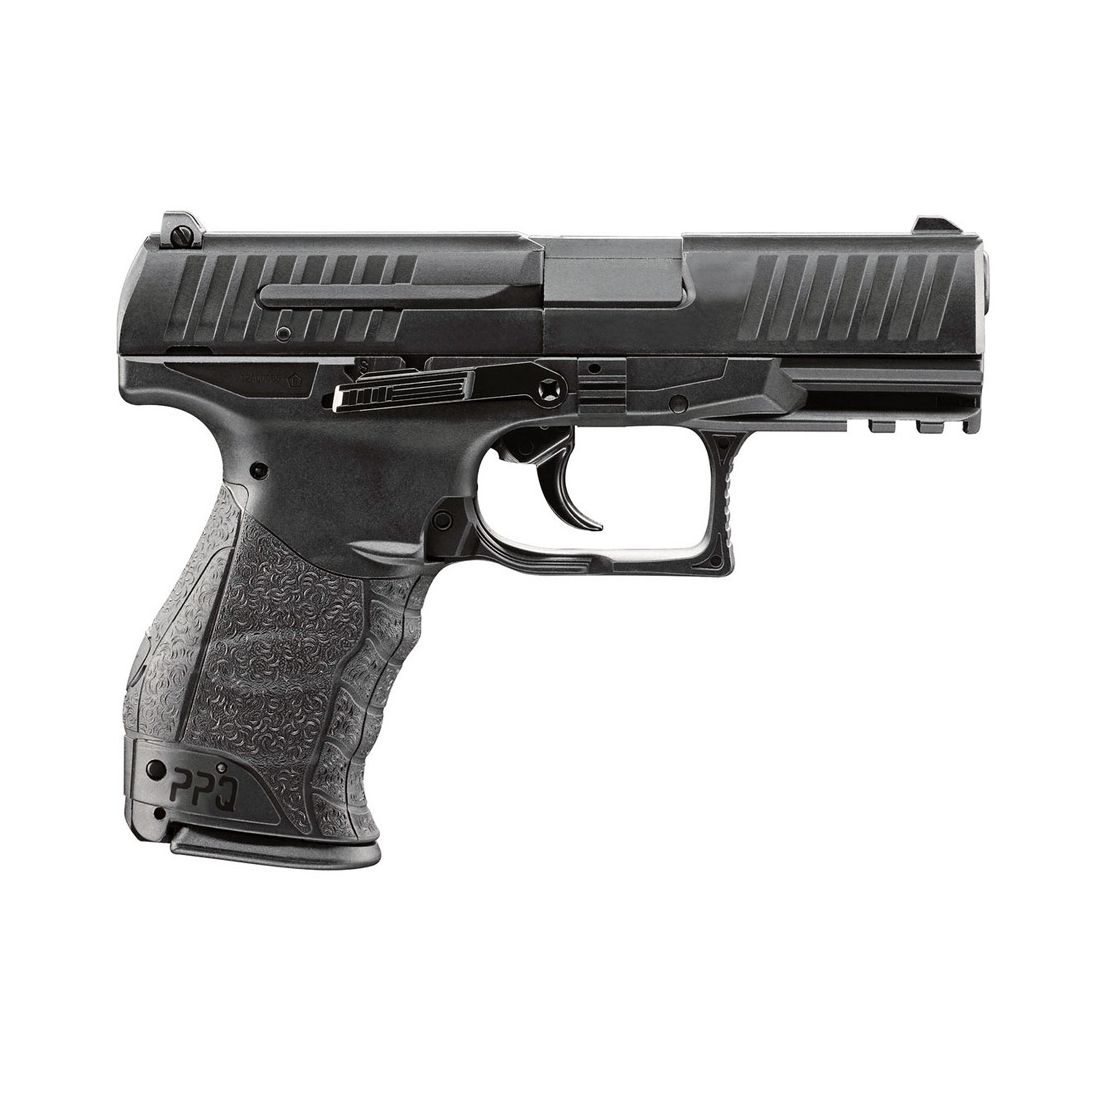 CO2 Pistole Walther PPQ Kaliber 4,5 mm (P18)